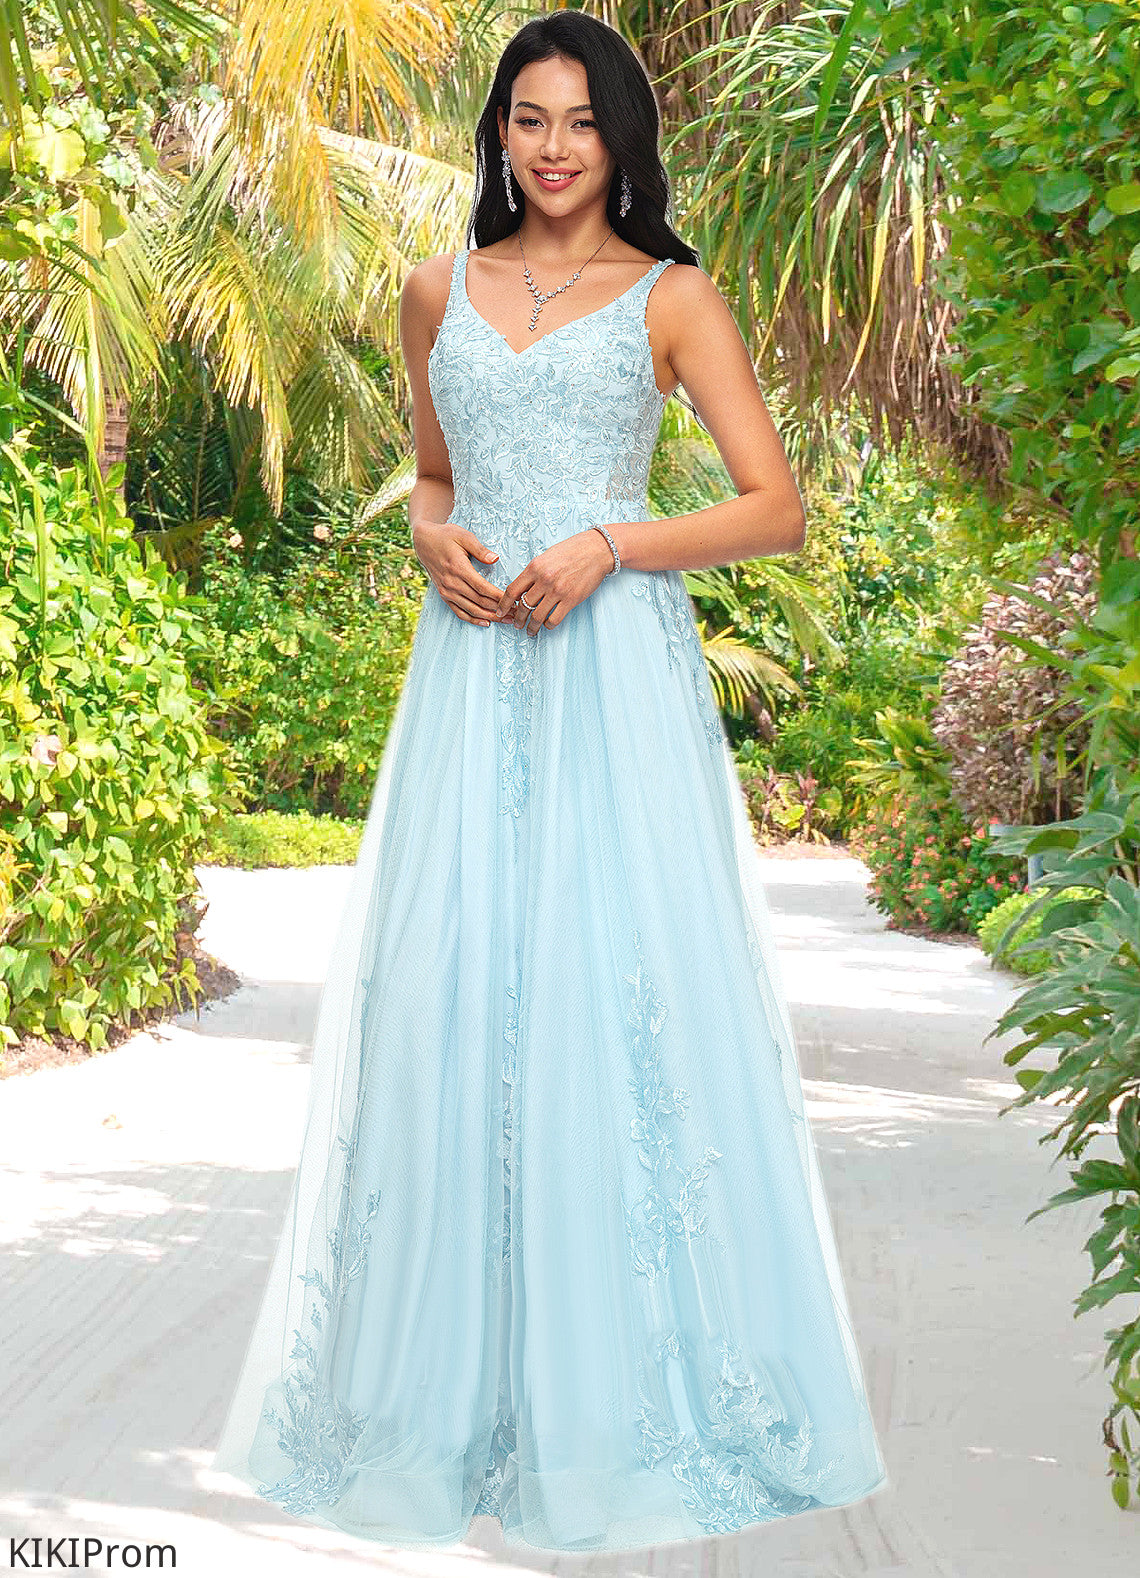 Laura A-line V-Neck Floor-Length Tulle Prom Dresses With Rhinestone Appliques Lace Sequins DZP0022225